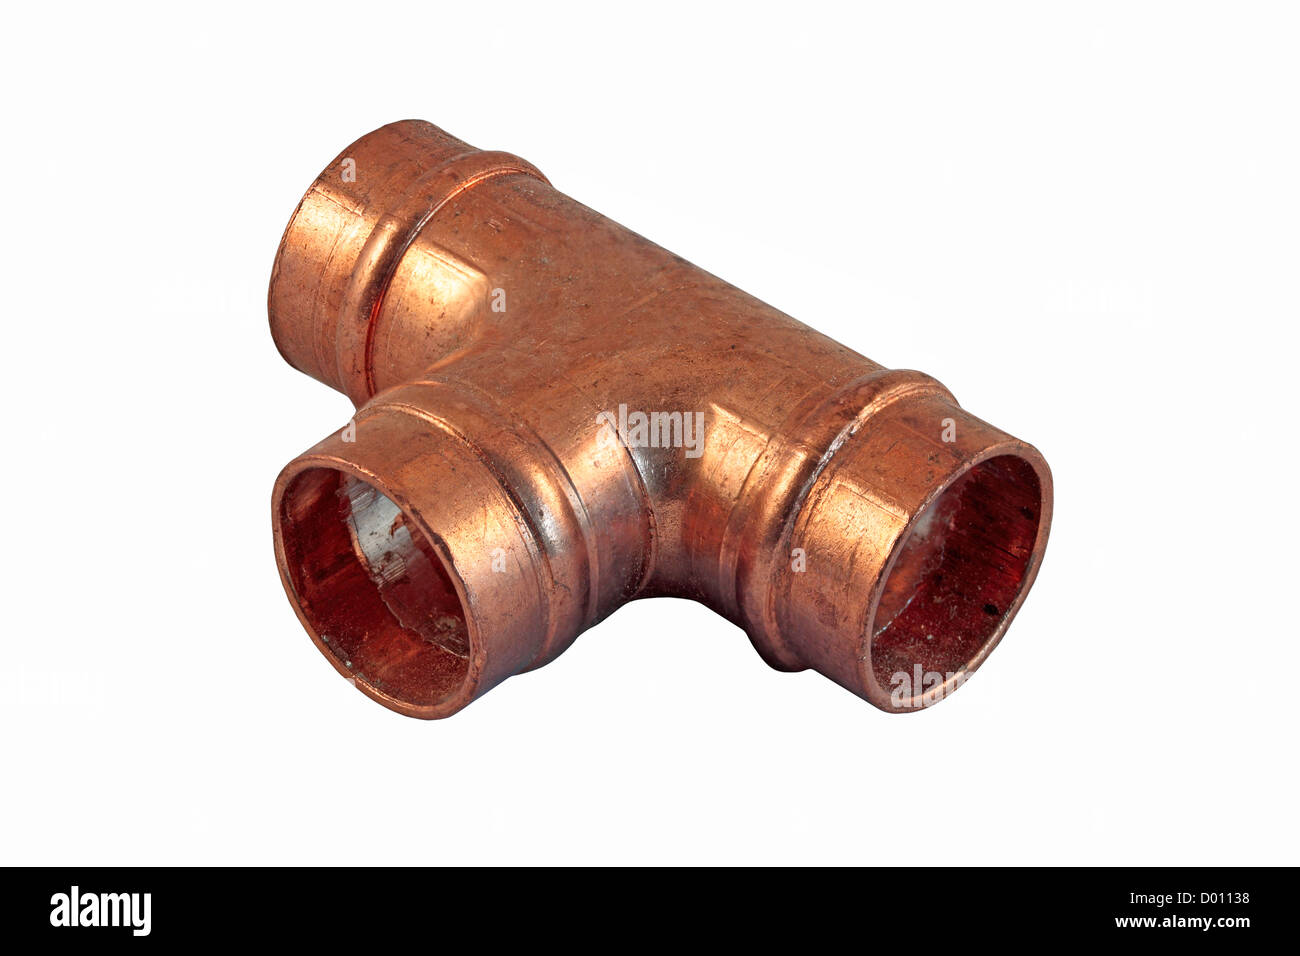 15mm Yorkshire Solder Ring Copper Tee Pipe Fitting Stock Photo